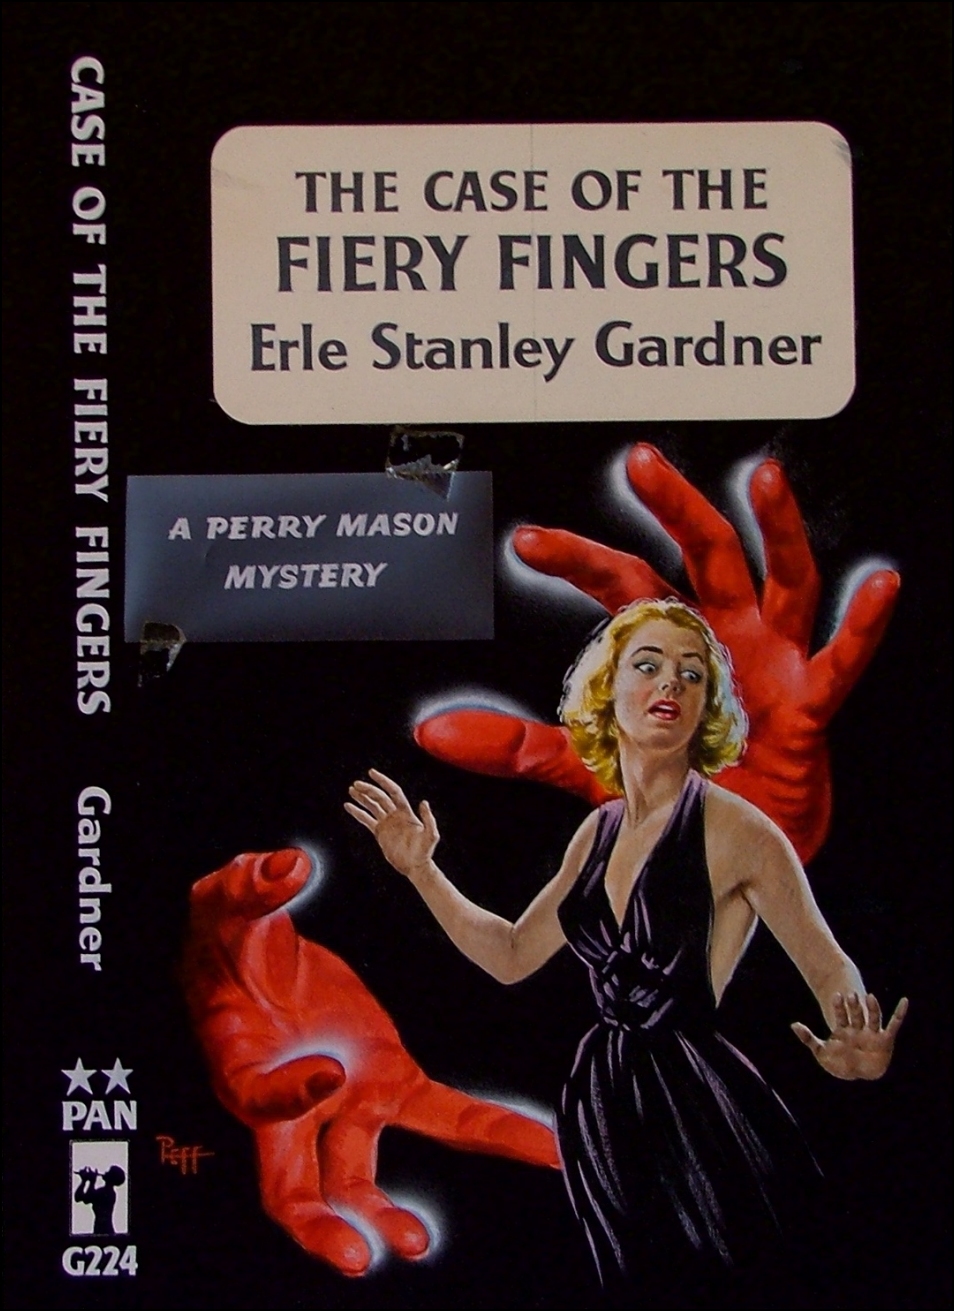 The Case Of The Fiery Fingers